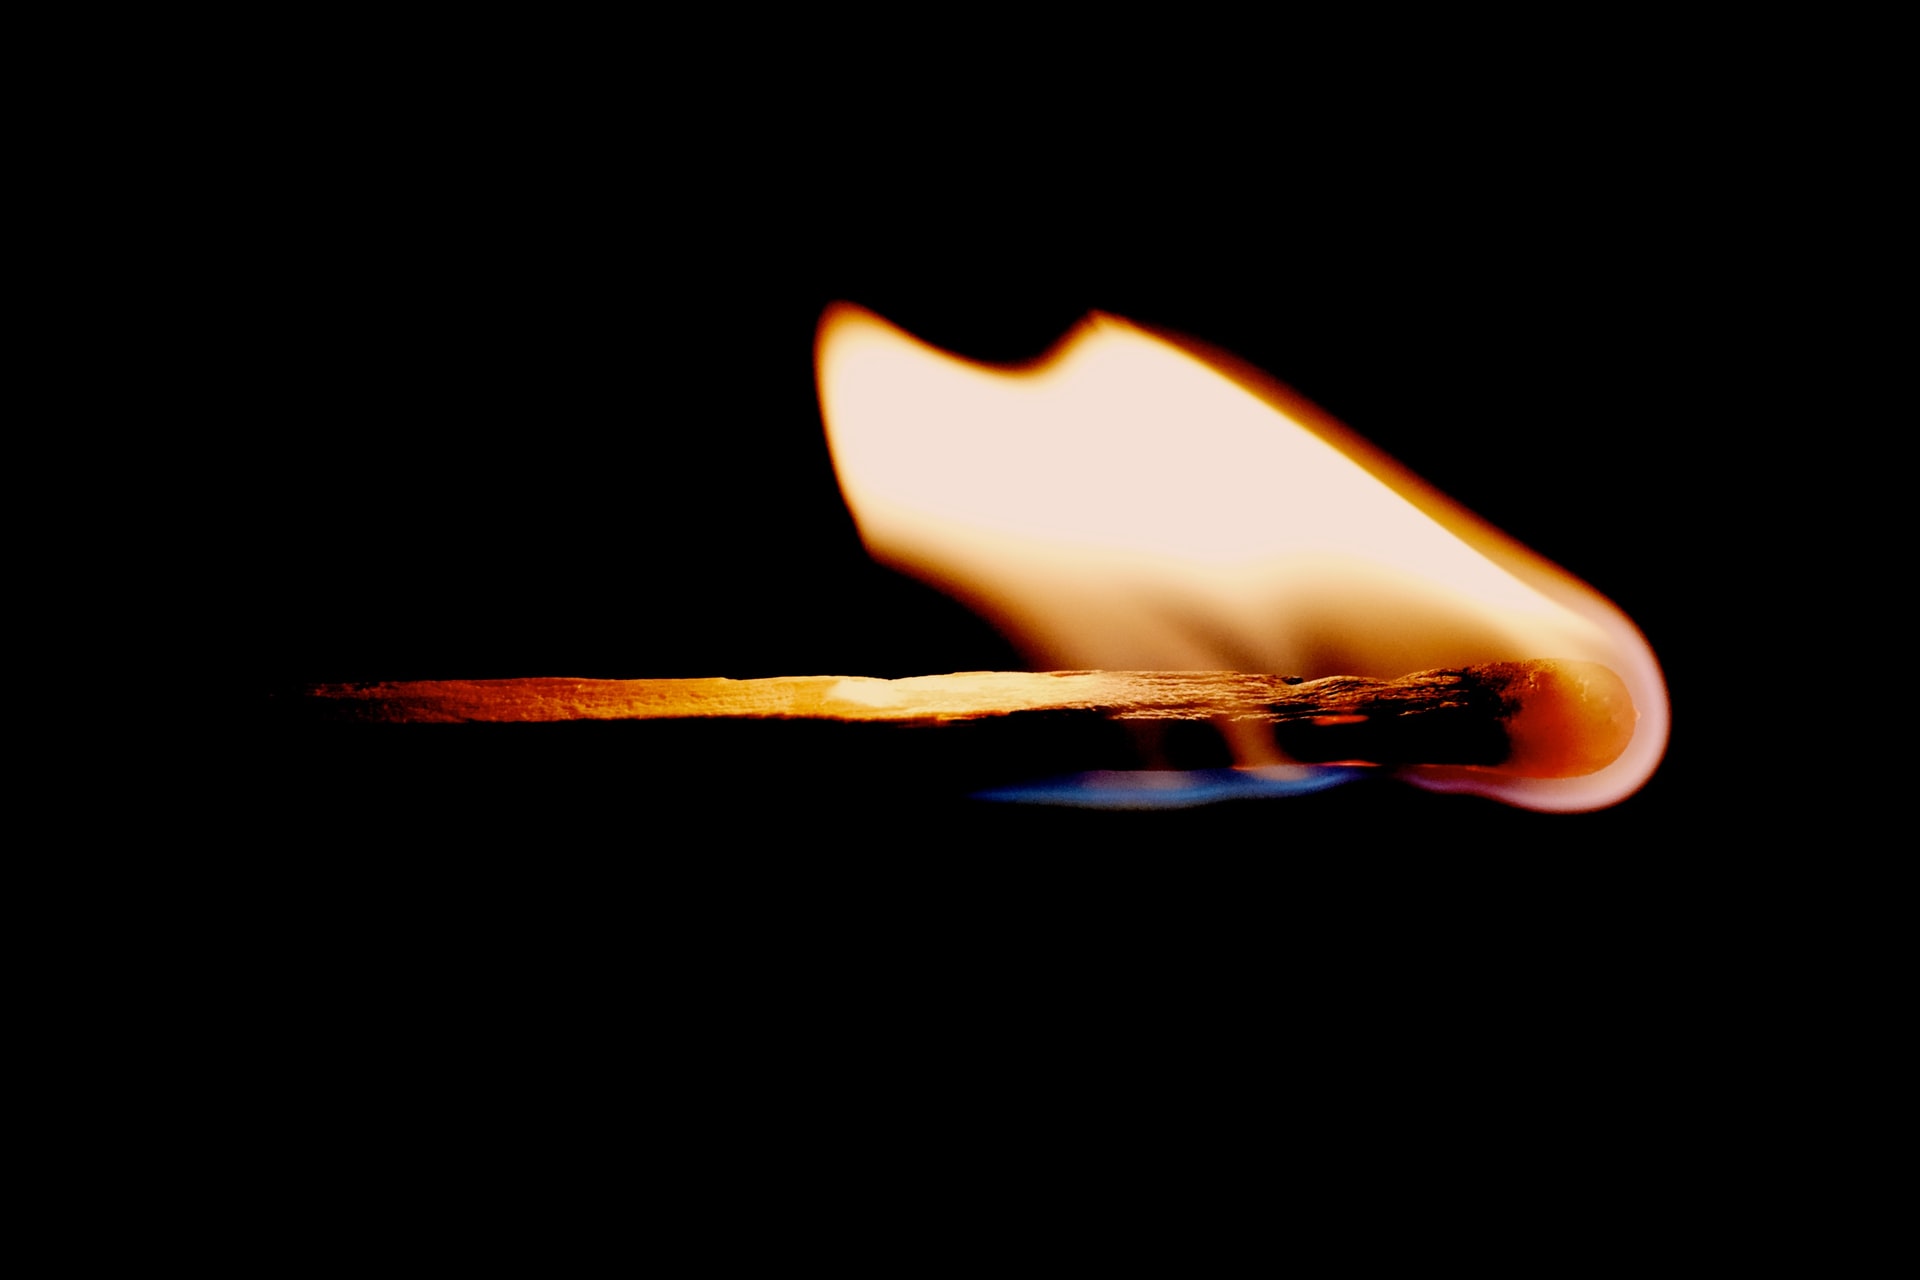 The trouble with poetry flame